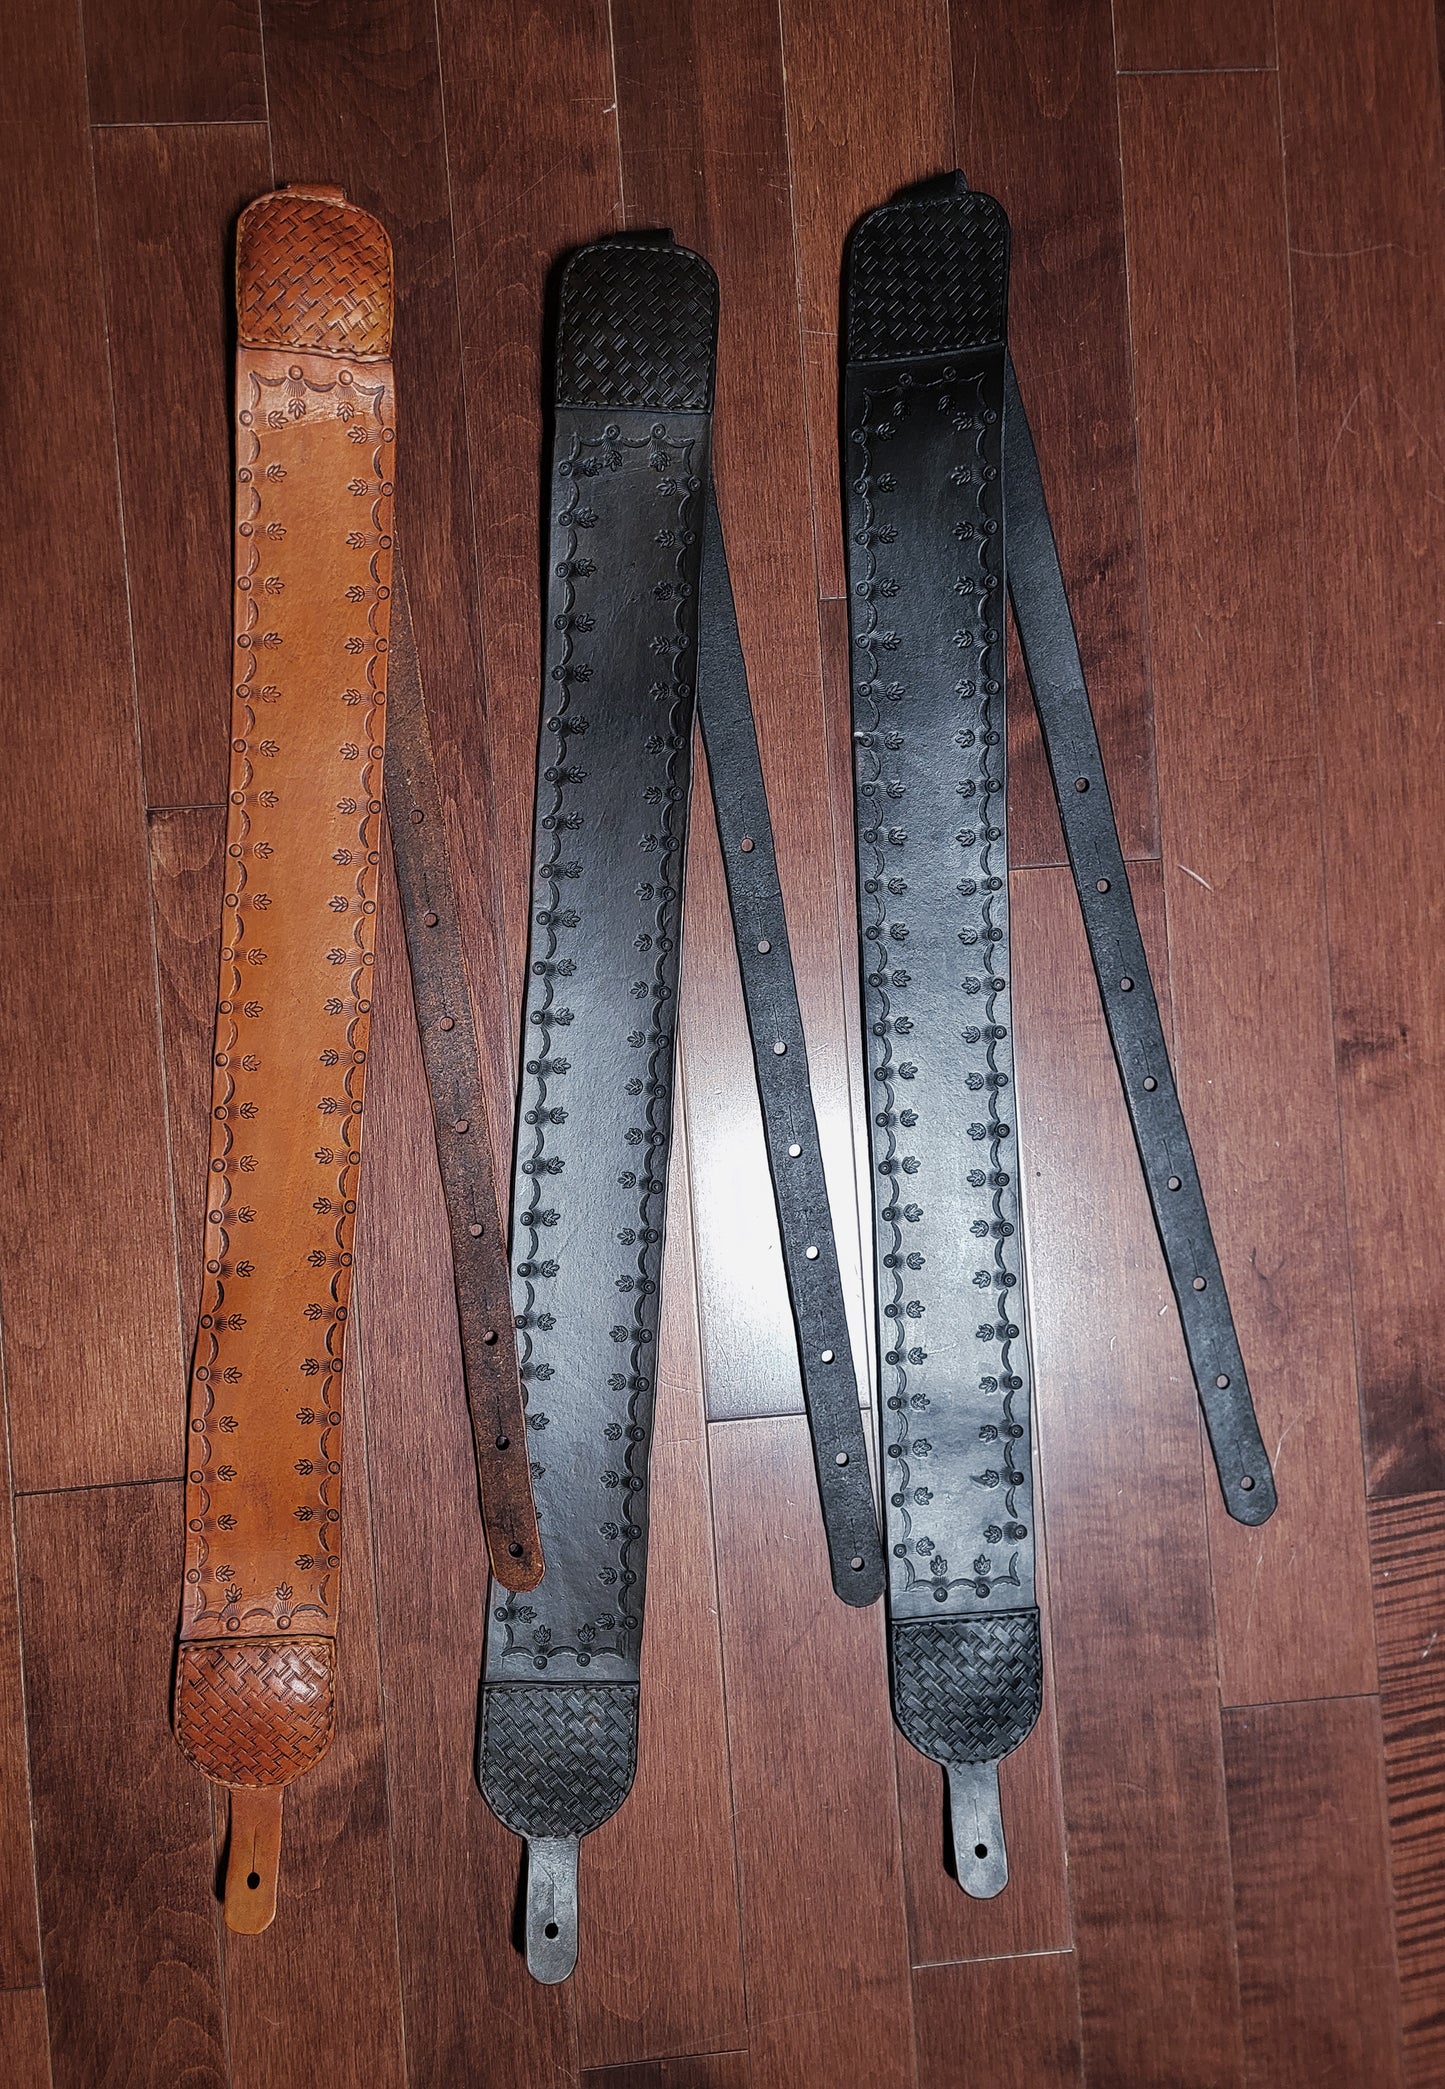 Handmade Leather Guitar Strap - Durable and Comfortable for Every Performance